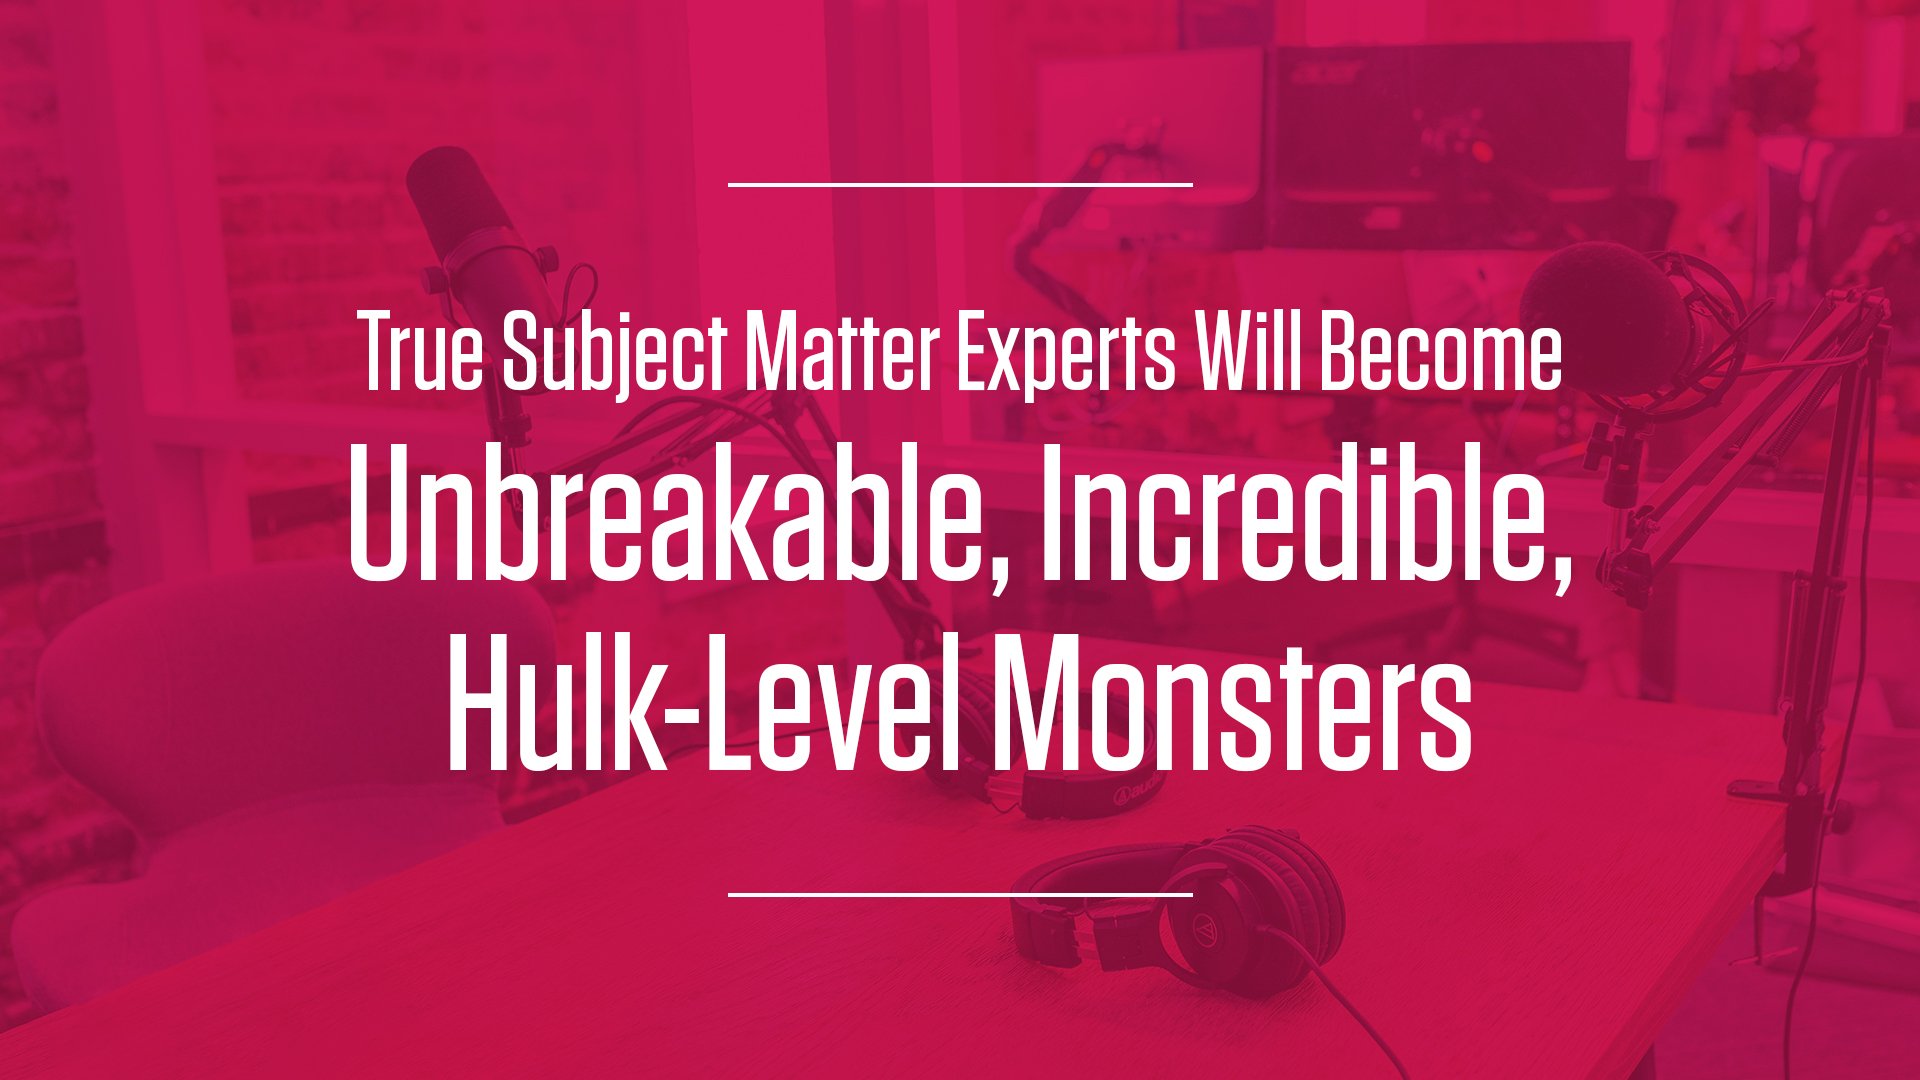 Subject-Matter Experts Will Become Unbreakable, Incredible, Hulk-Level Monsters